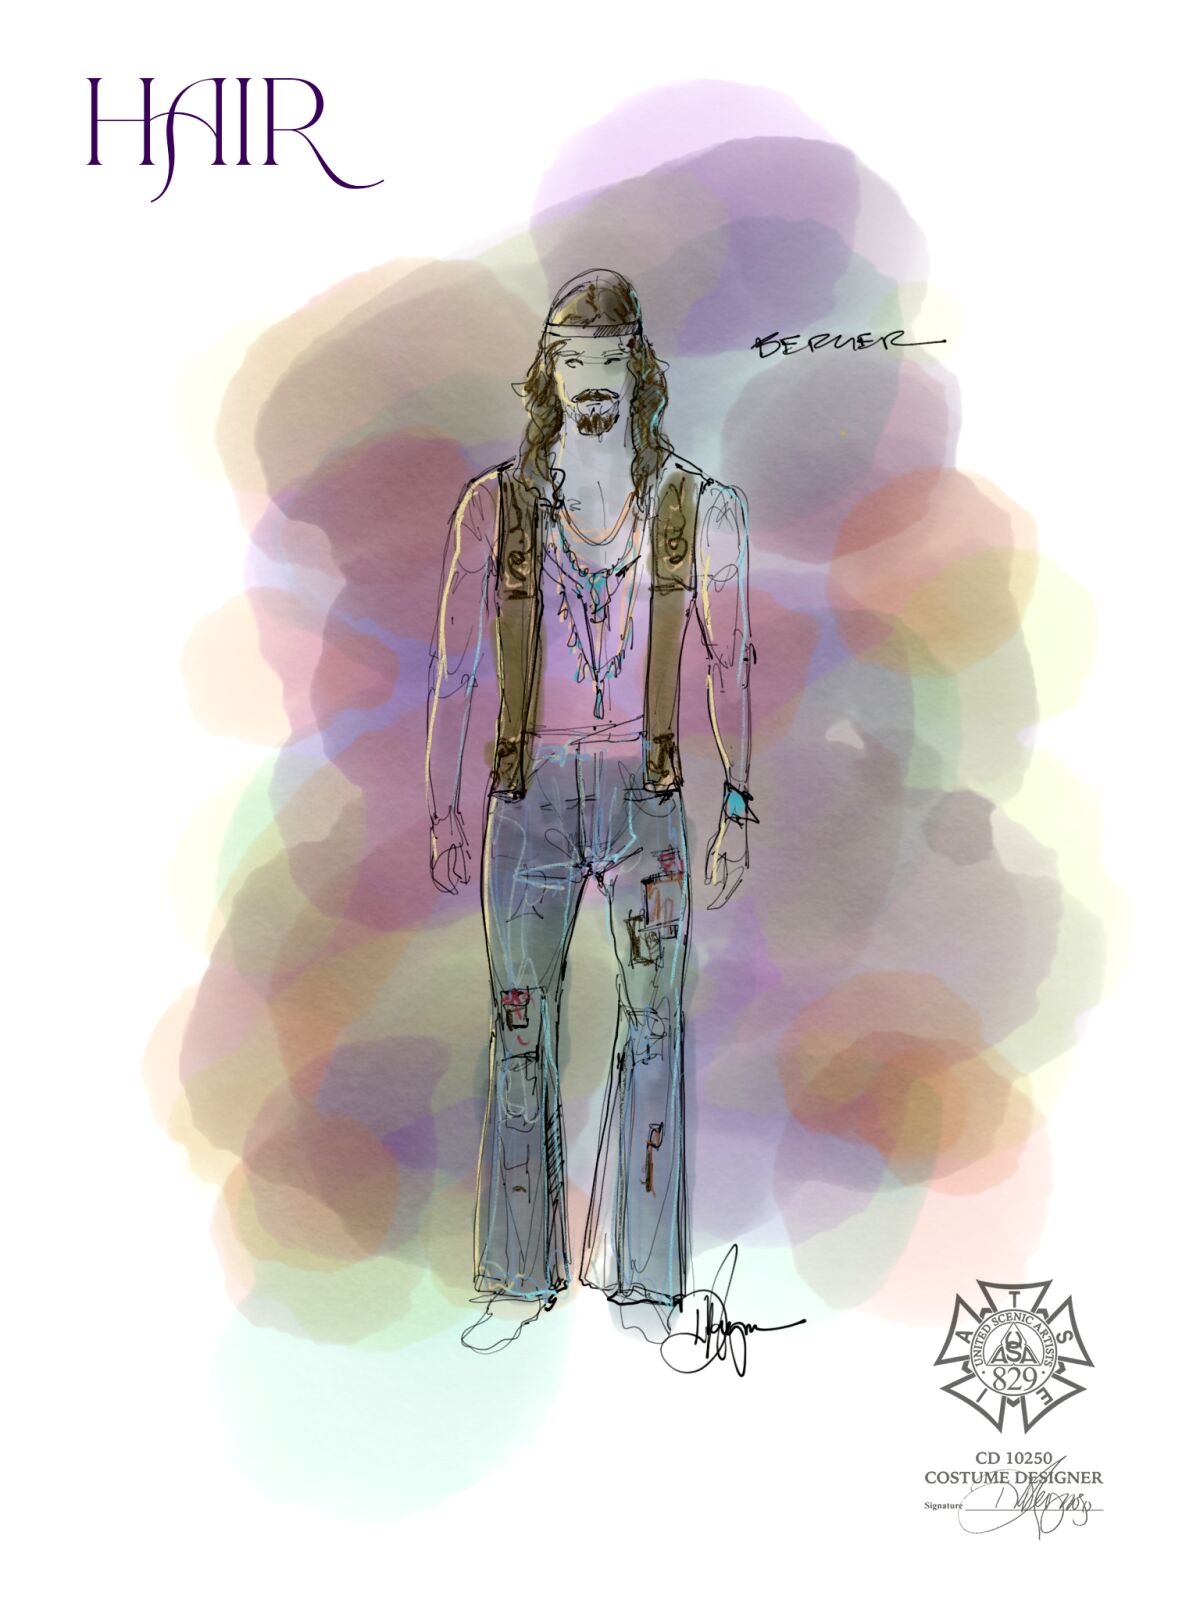 A sketch by "Hair" costume designer David Israel Reynoso for Berger, played by Andrew Polec, at The Old Globe.